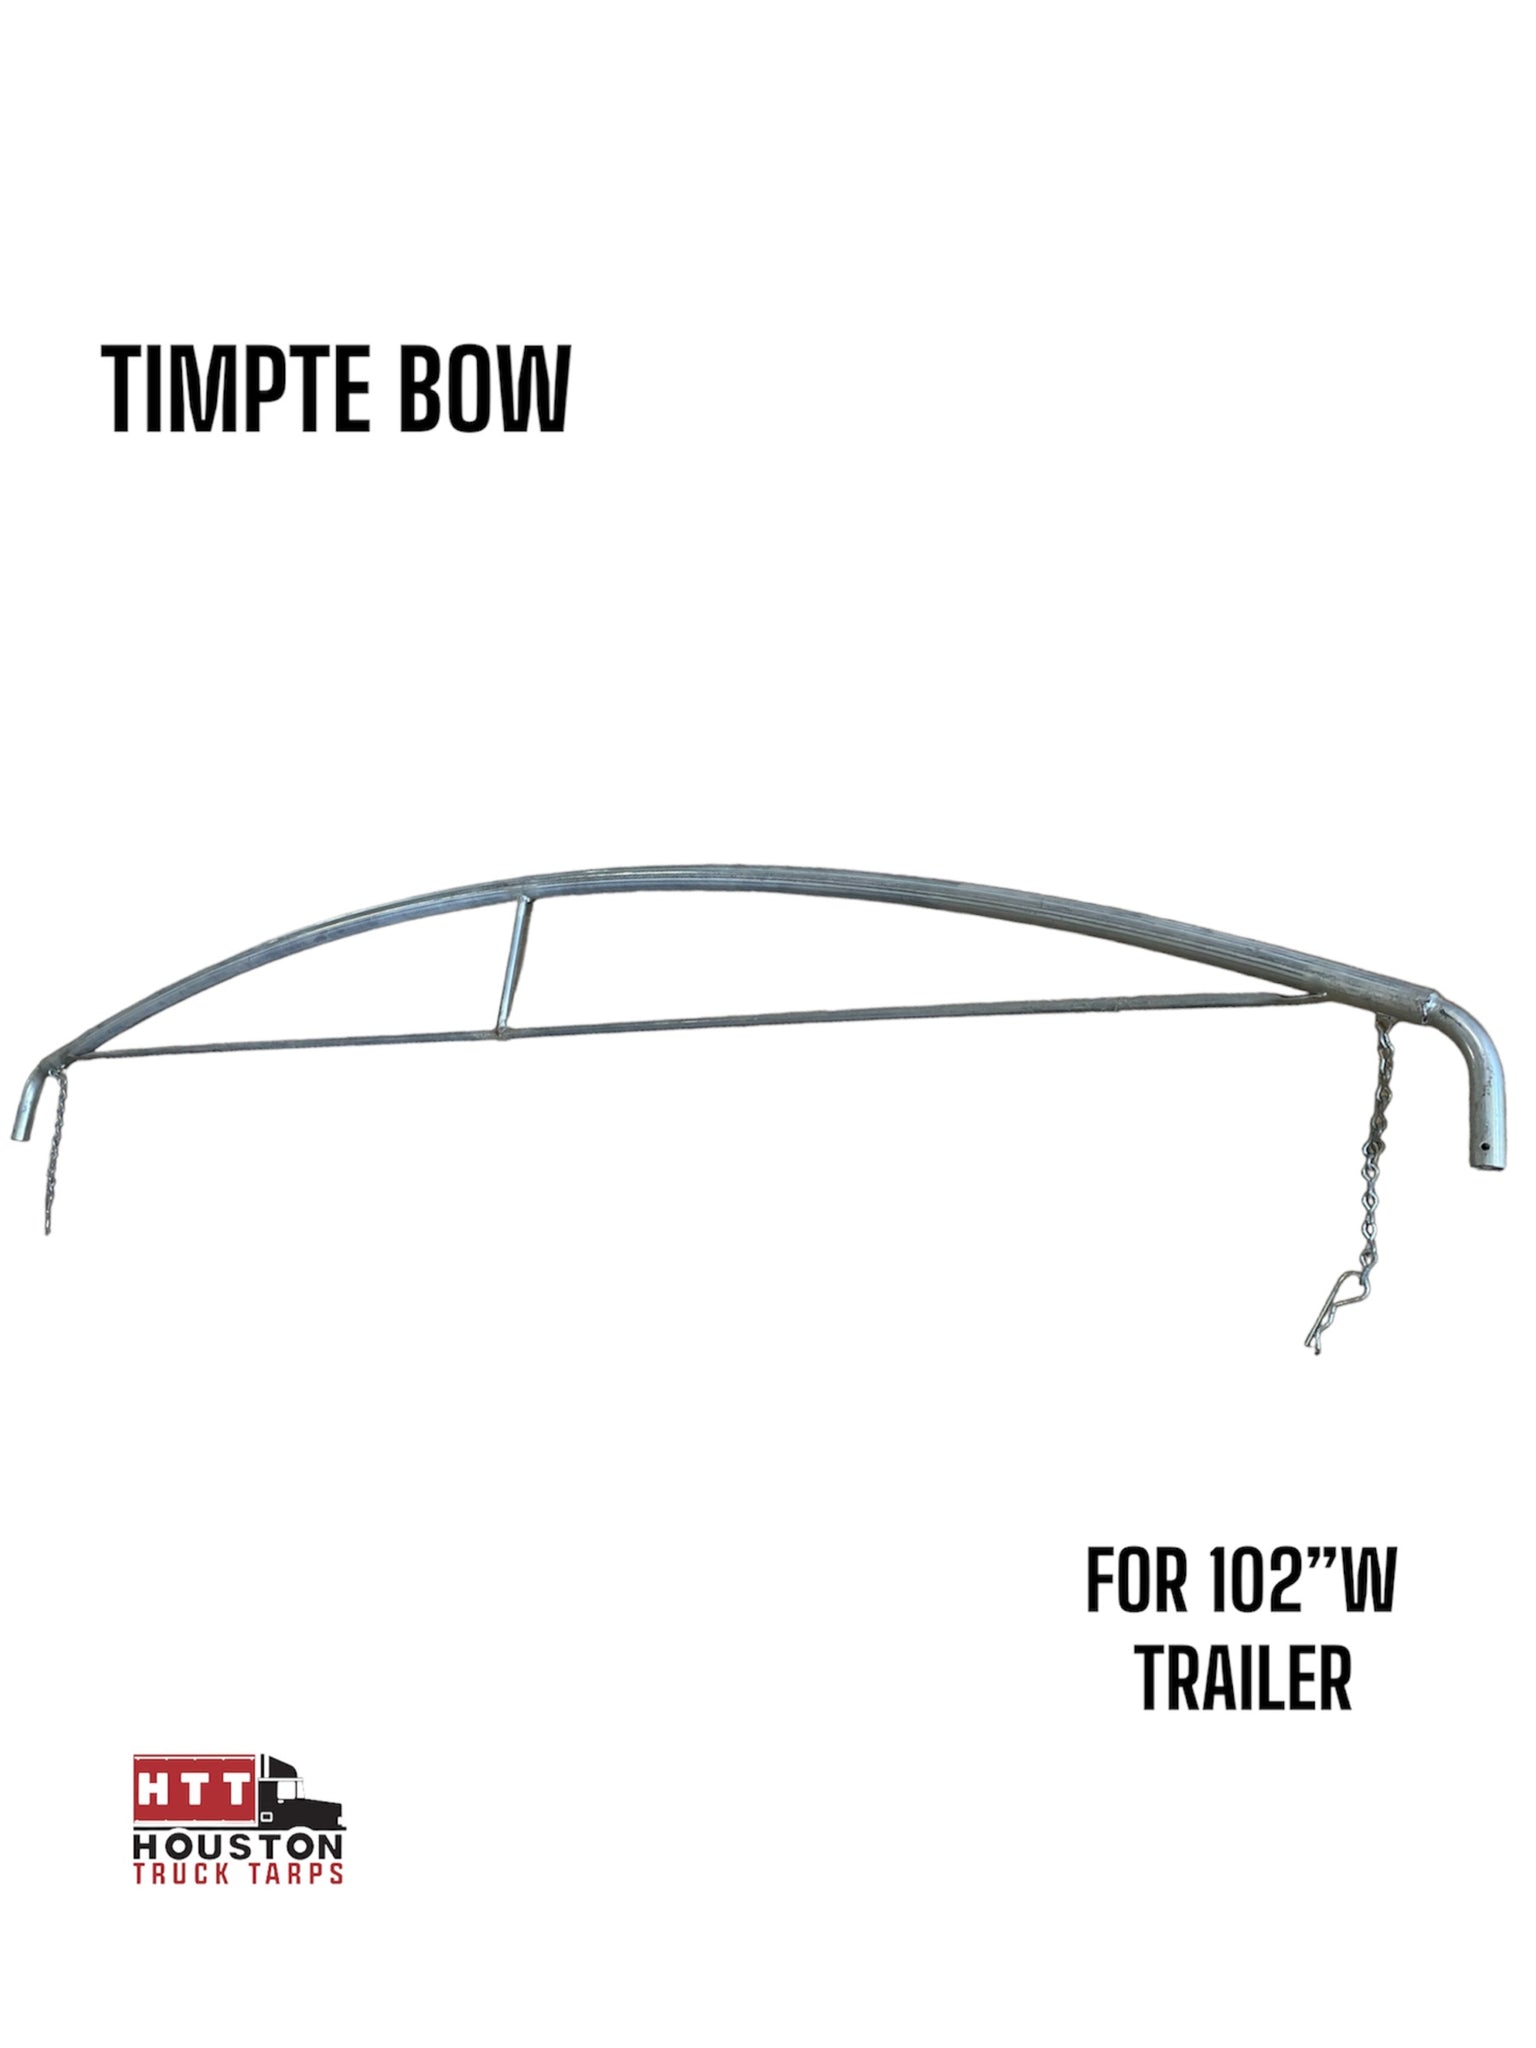 TIMPTE Bow For 102” Trailer